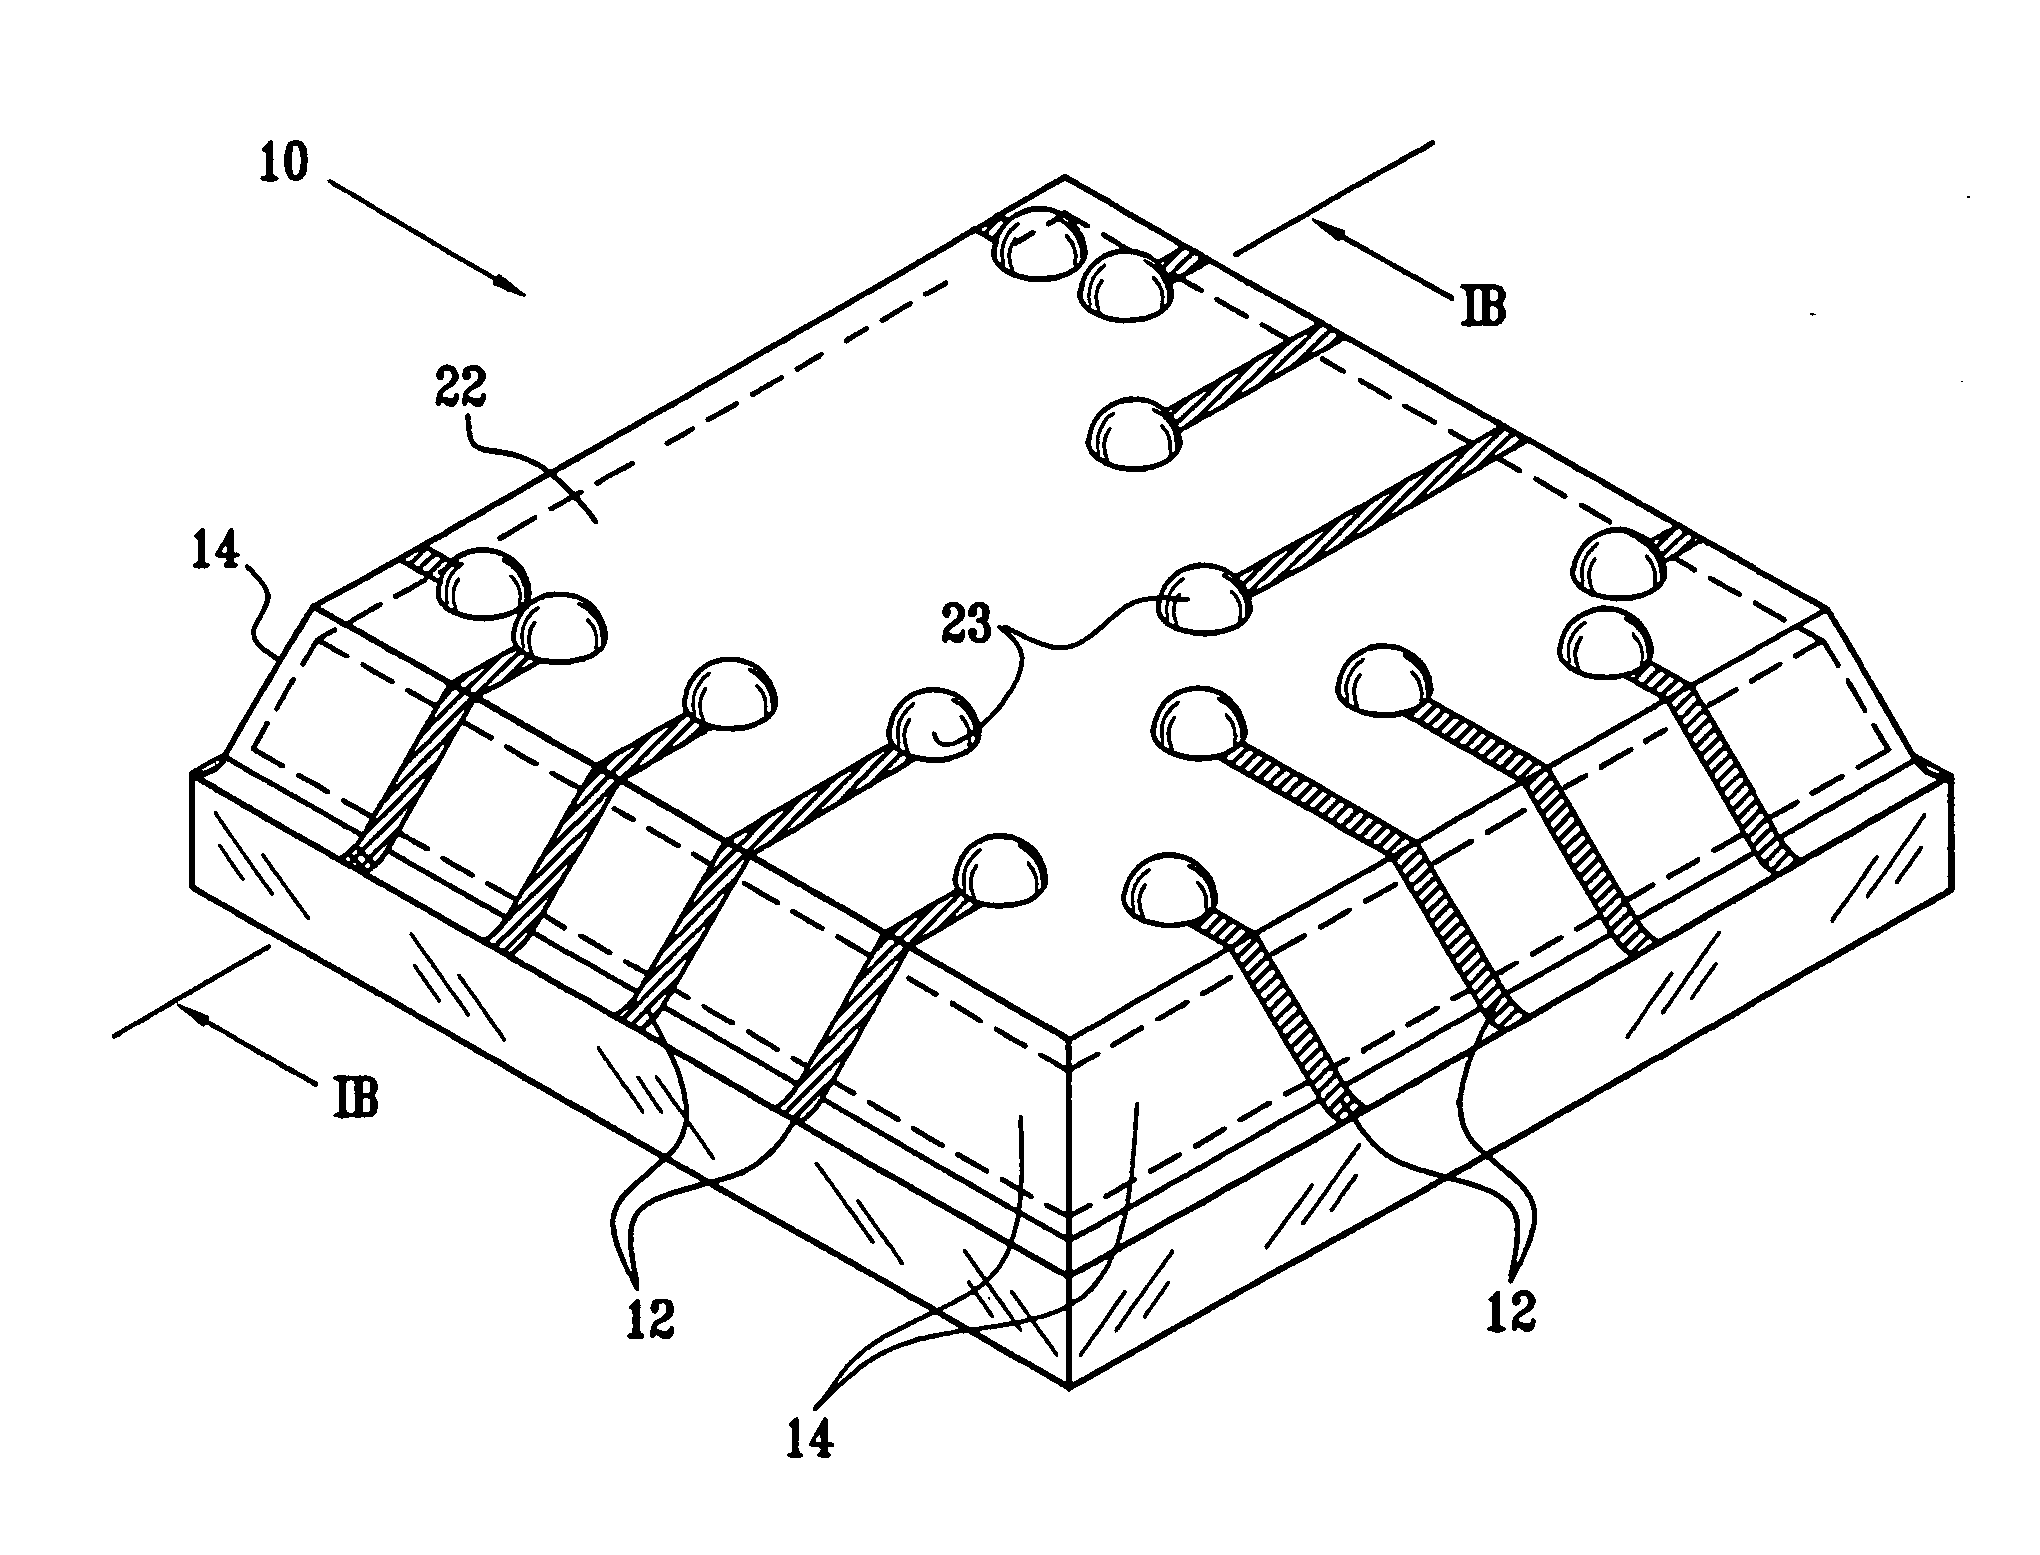 Methods and apparatus for packaging integrated circuit devices